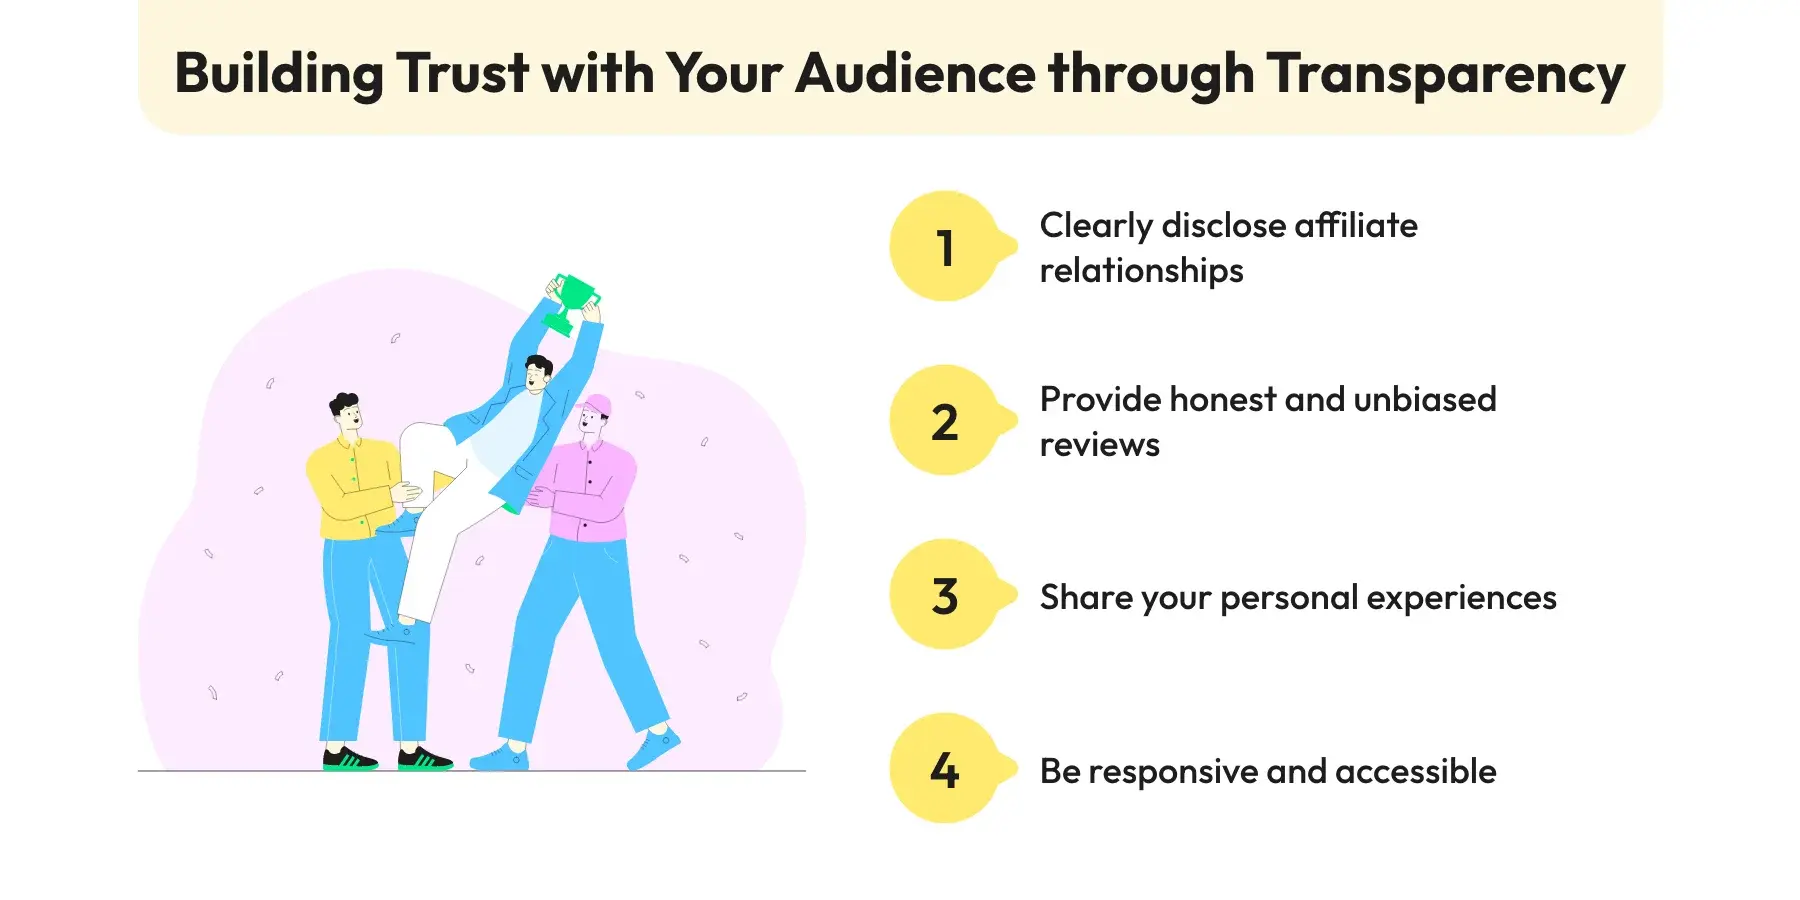 transparency, relationship, disclose, honest, unbiased, personal experiences, responsive, accessible, building trust with your audience, affiliate link promotion